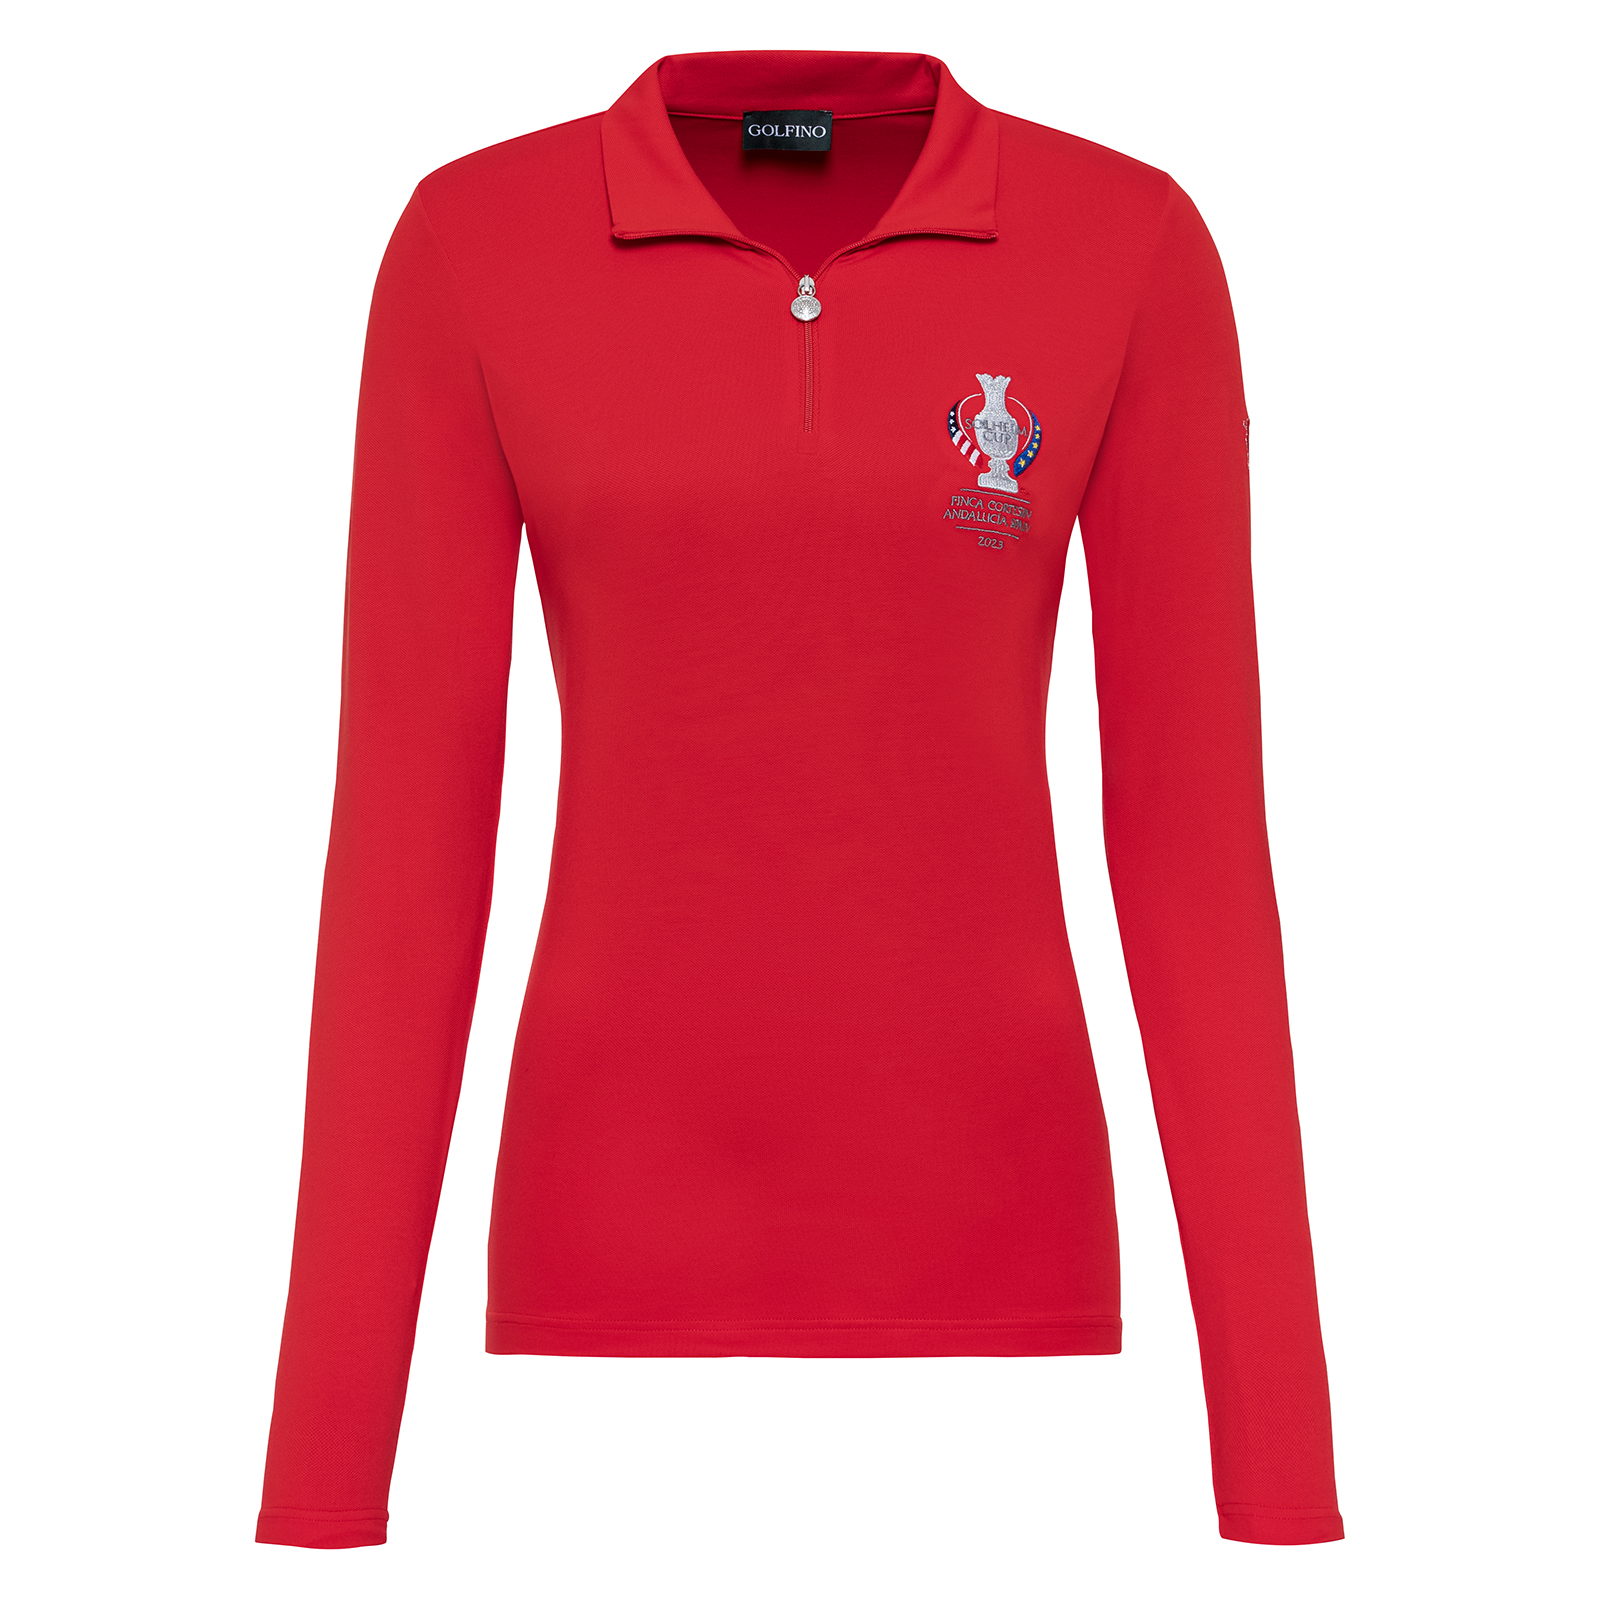 Ladies Golf Troyer with UV Protection in Solheim Cup Design